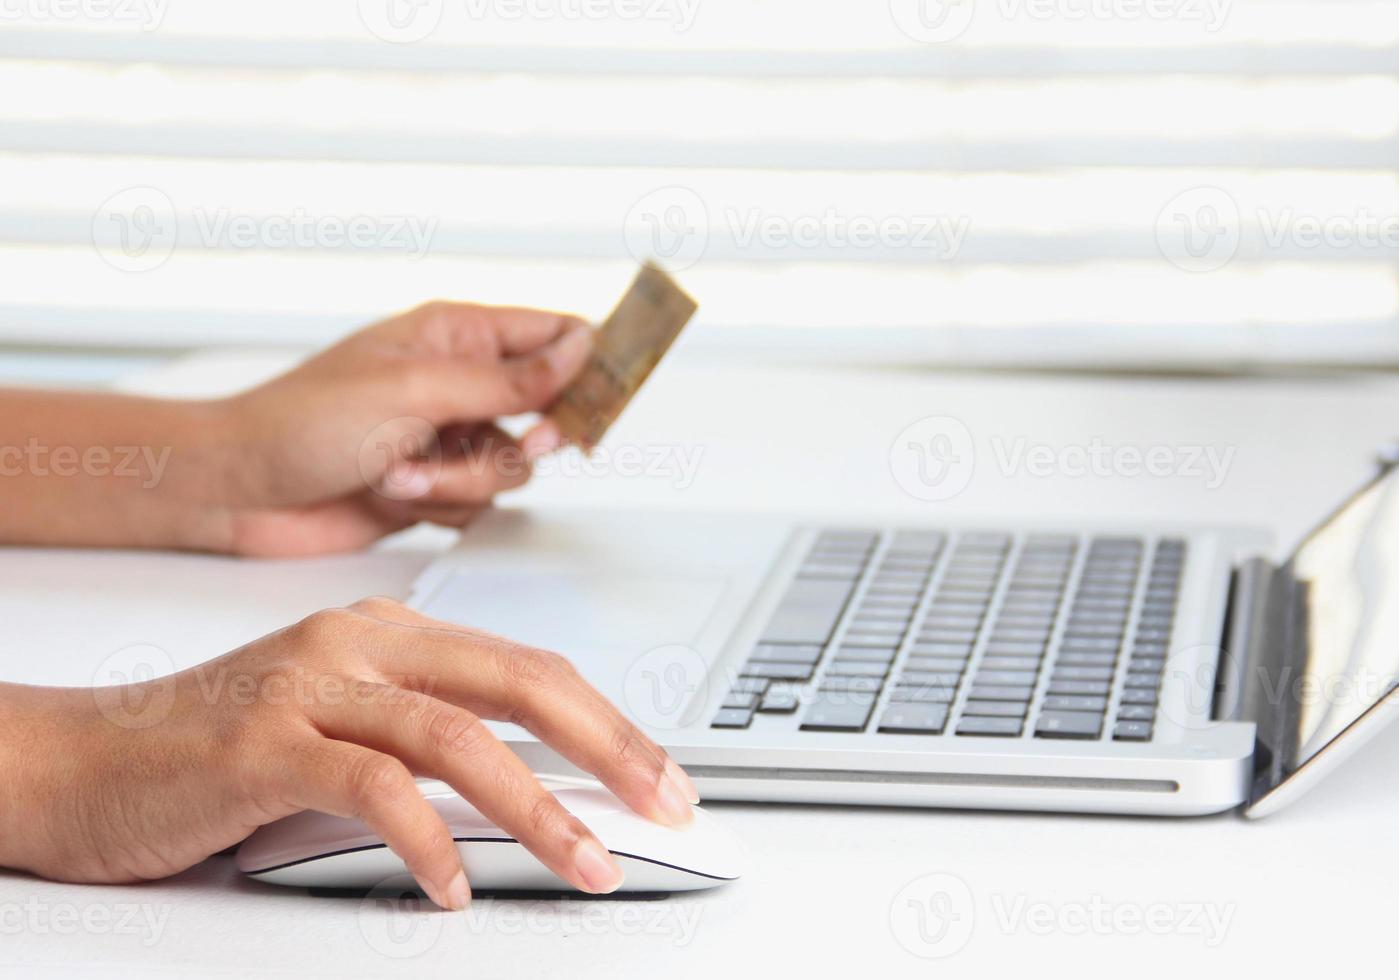 online purchase and online banking using a credit card photo